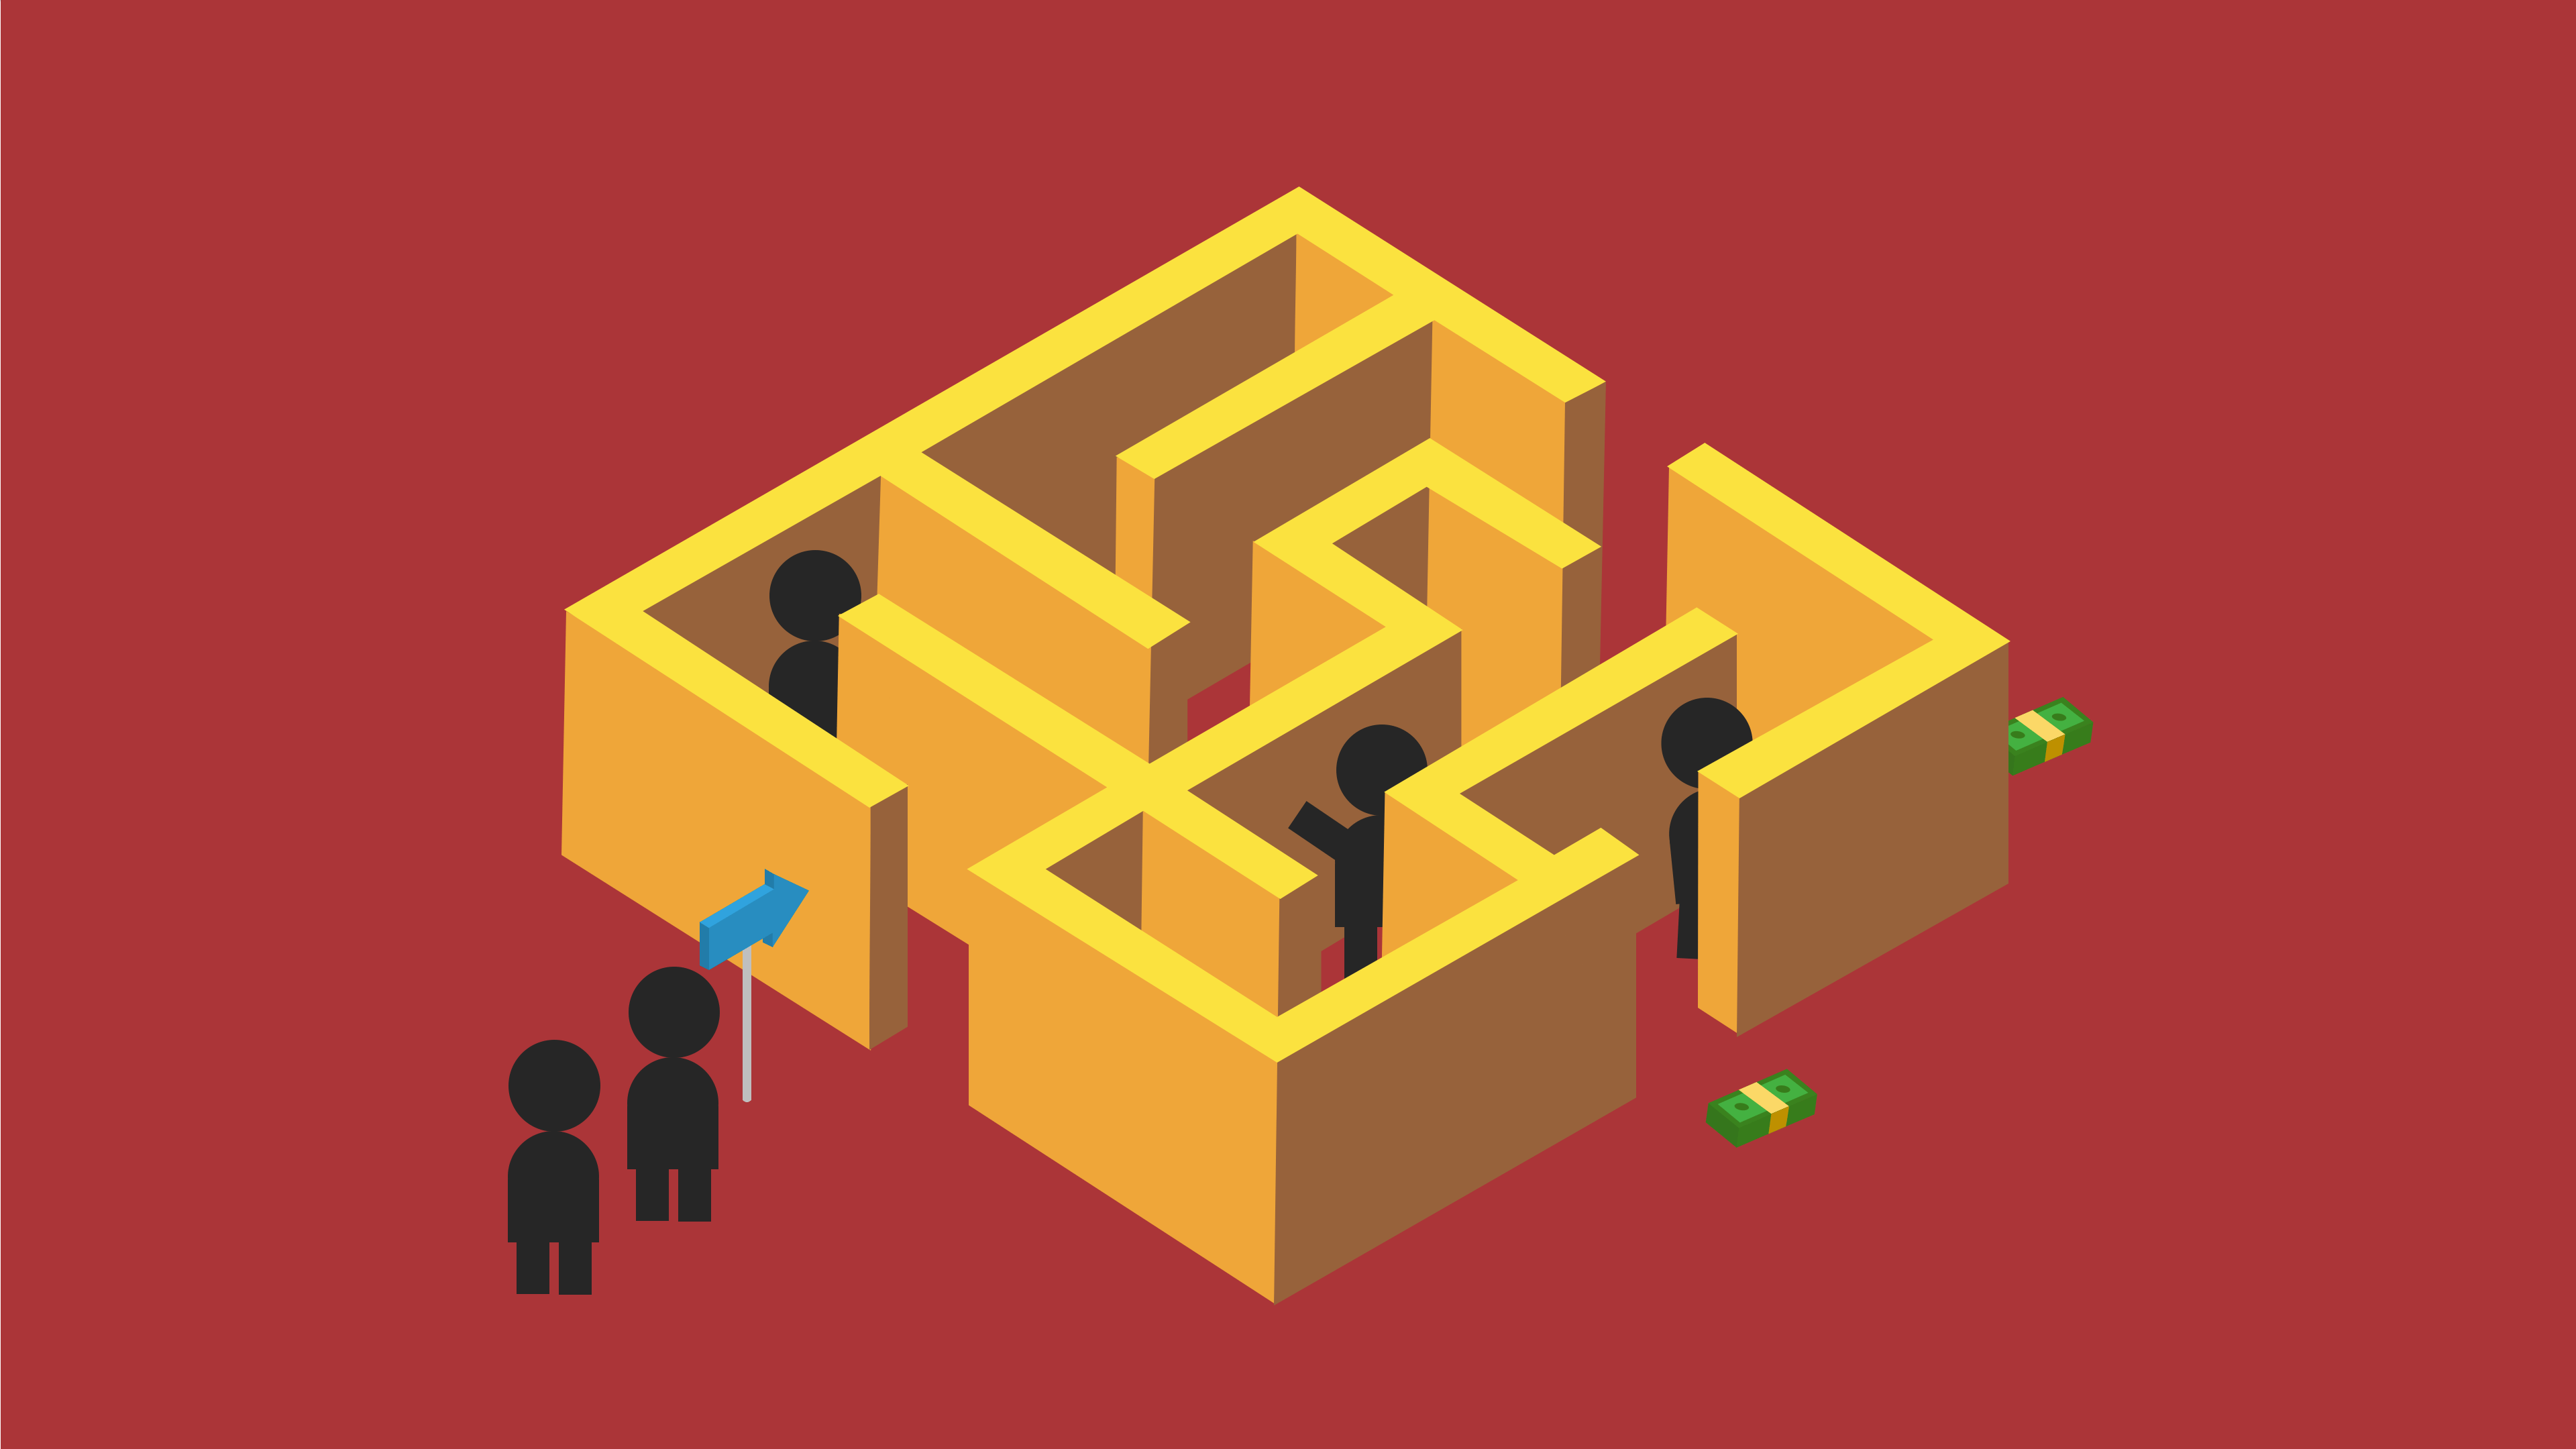 A maze where whoever manages to find an exit receives a monetary reward.